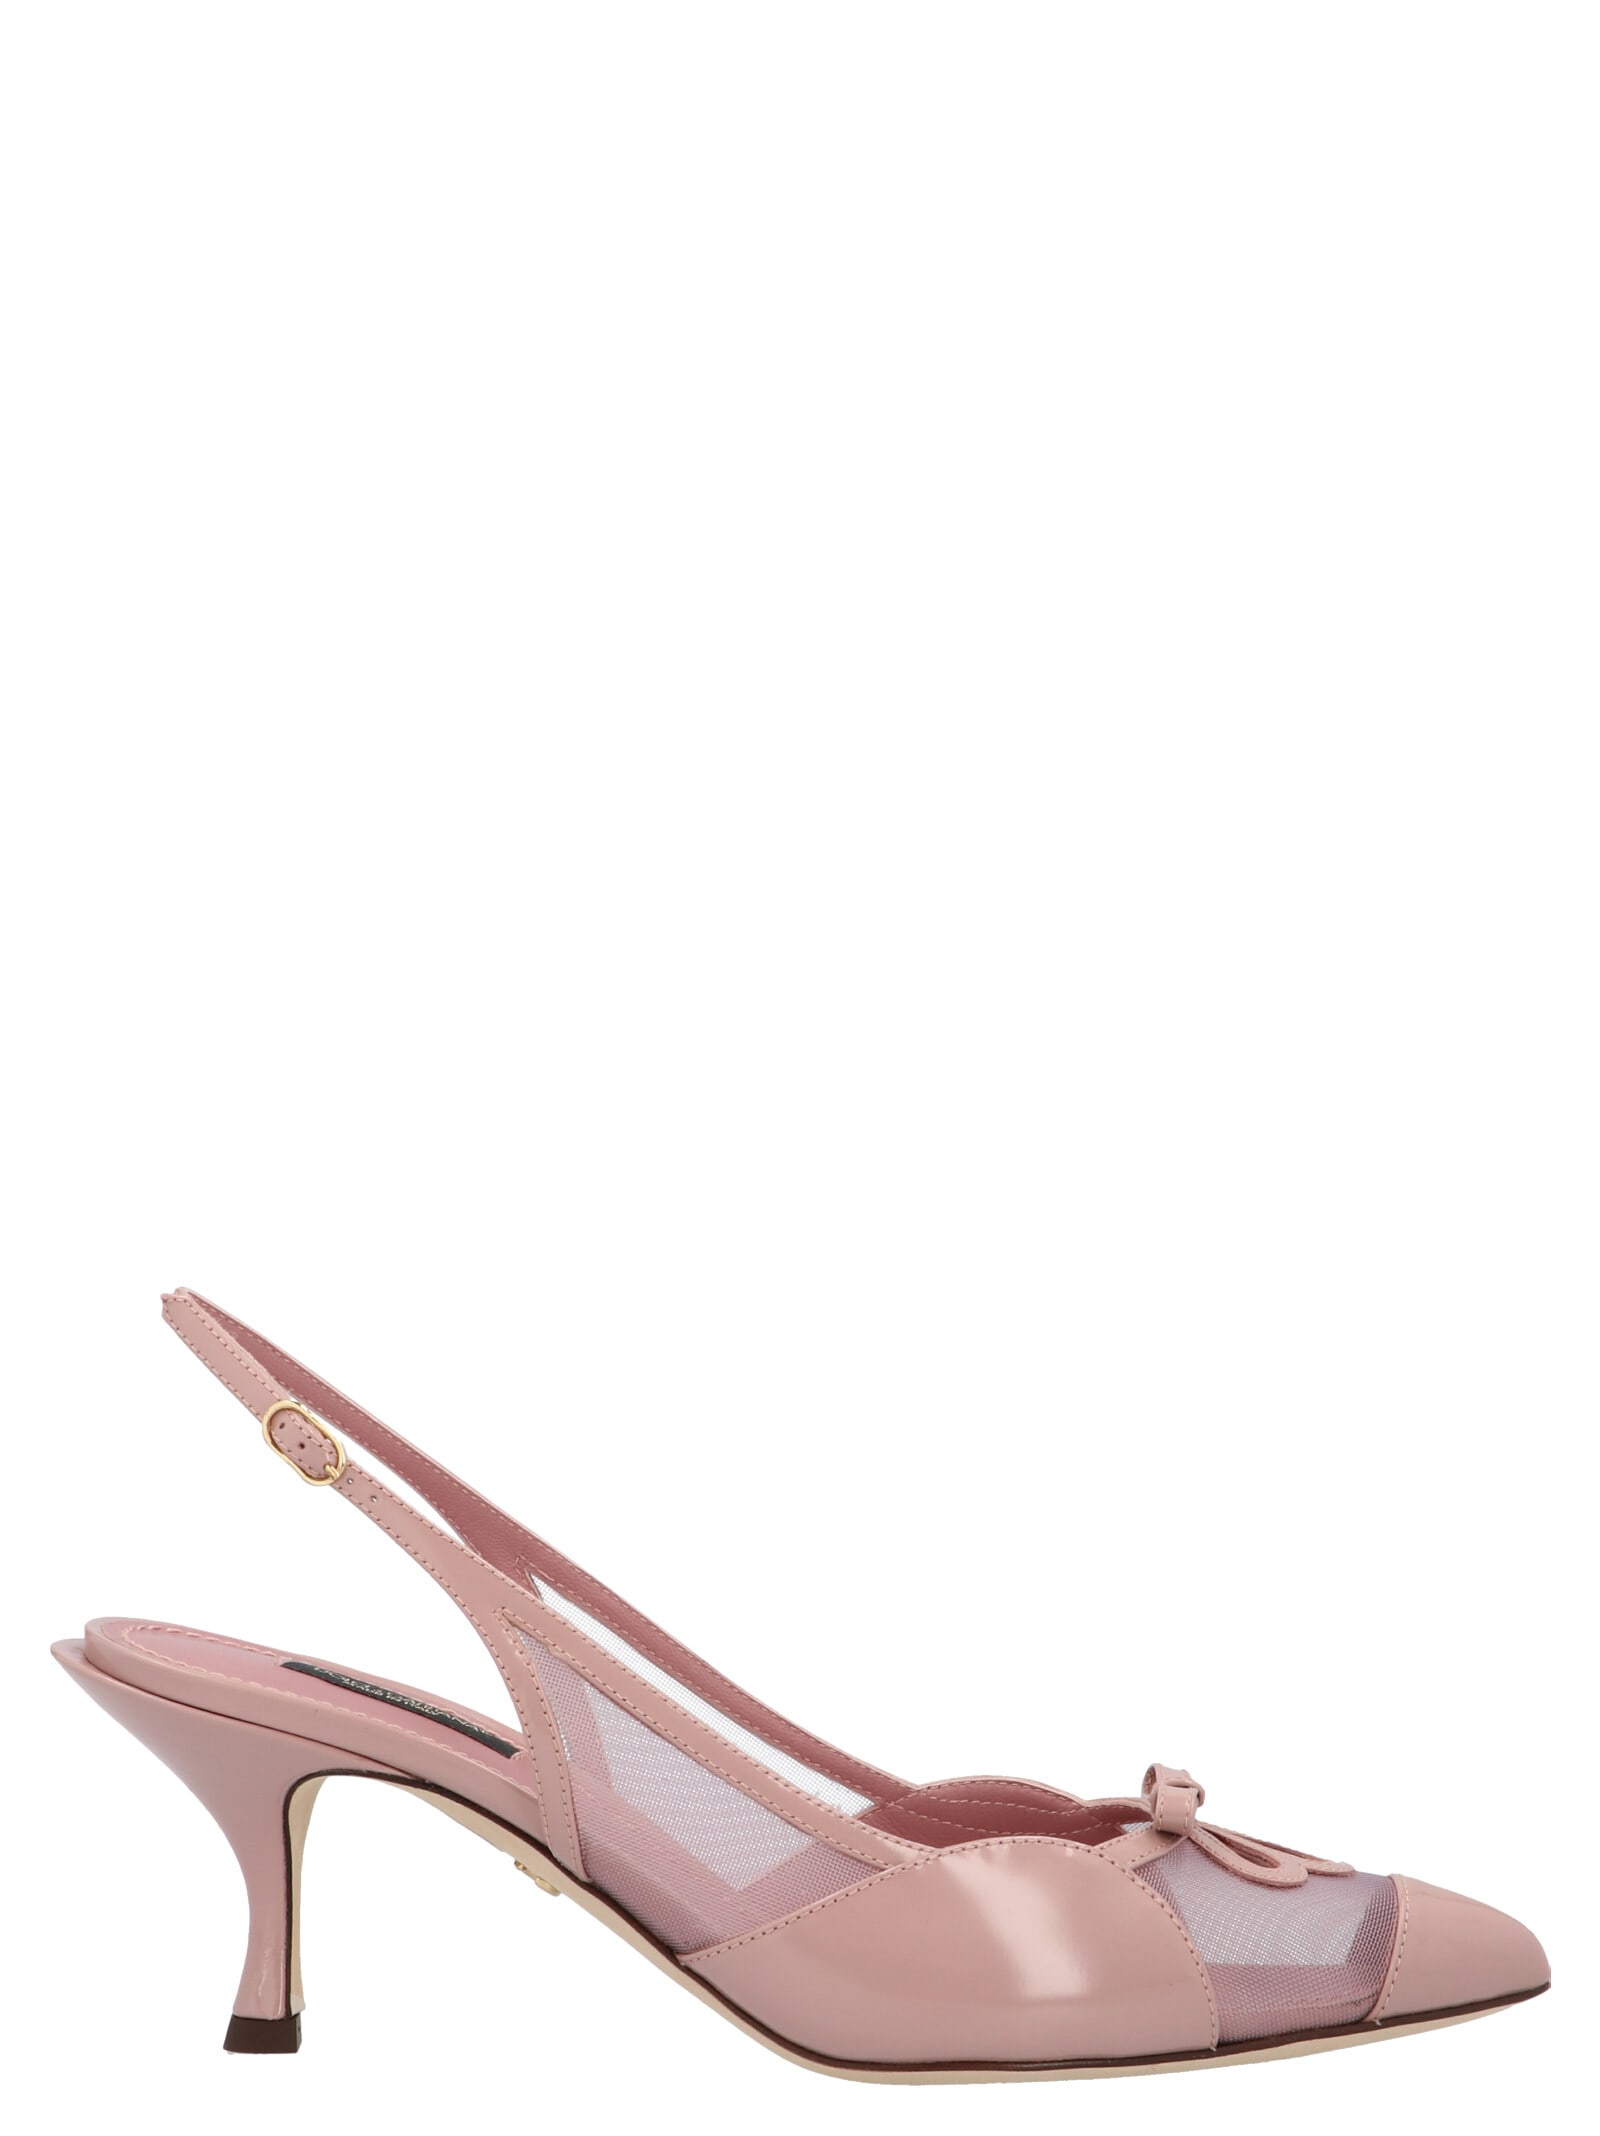 Dolce & Gabbana Shoes In Pink